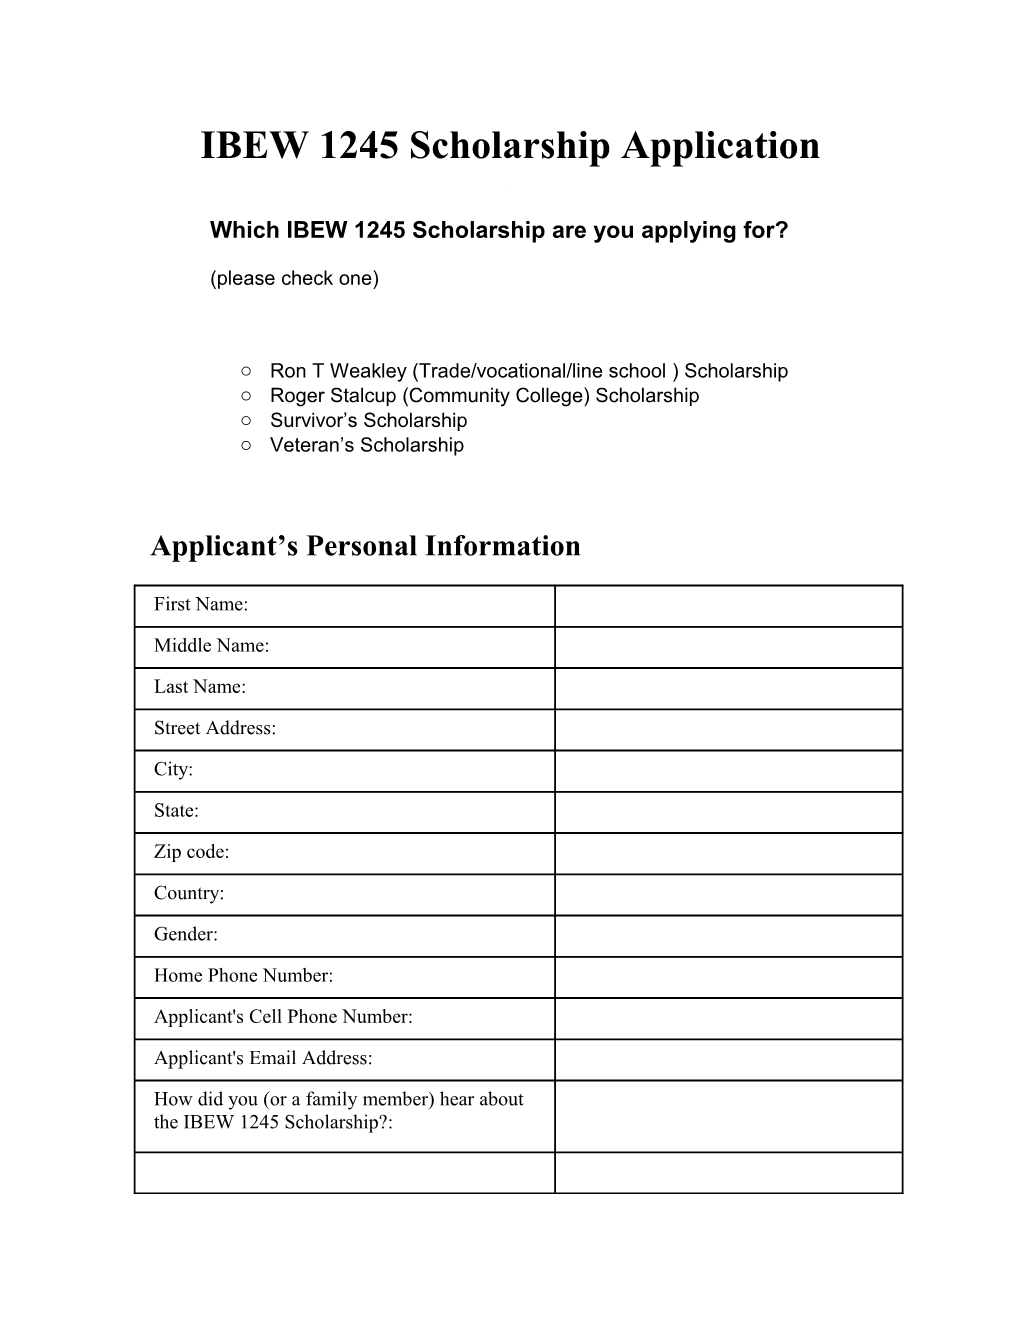 Which IBEW 1245 Scholarship Are You Applying For?